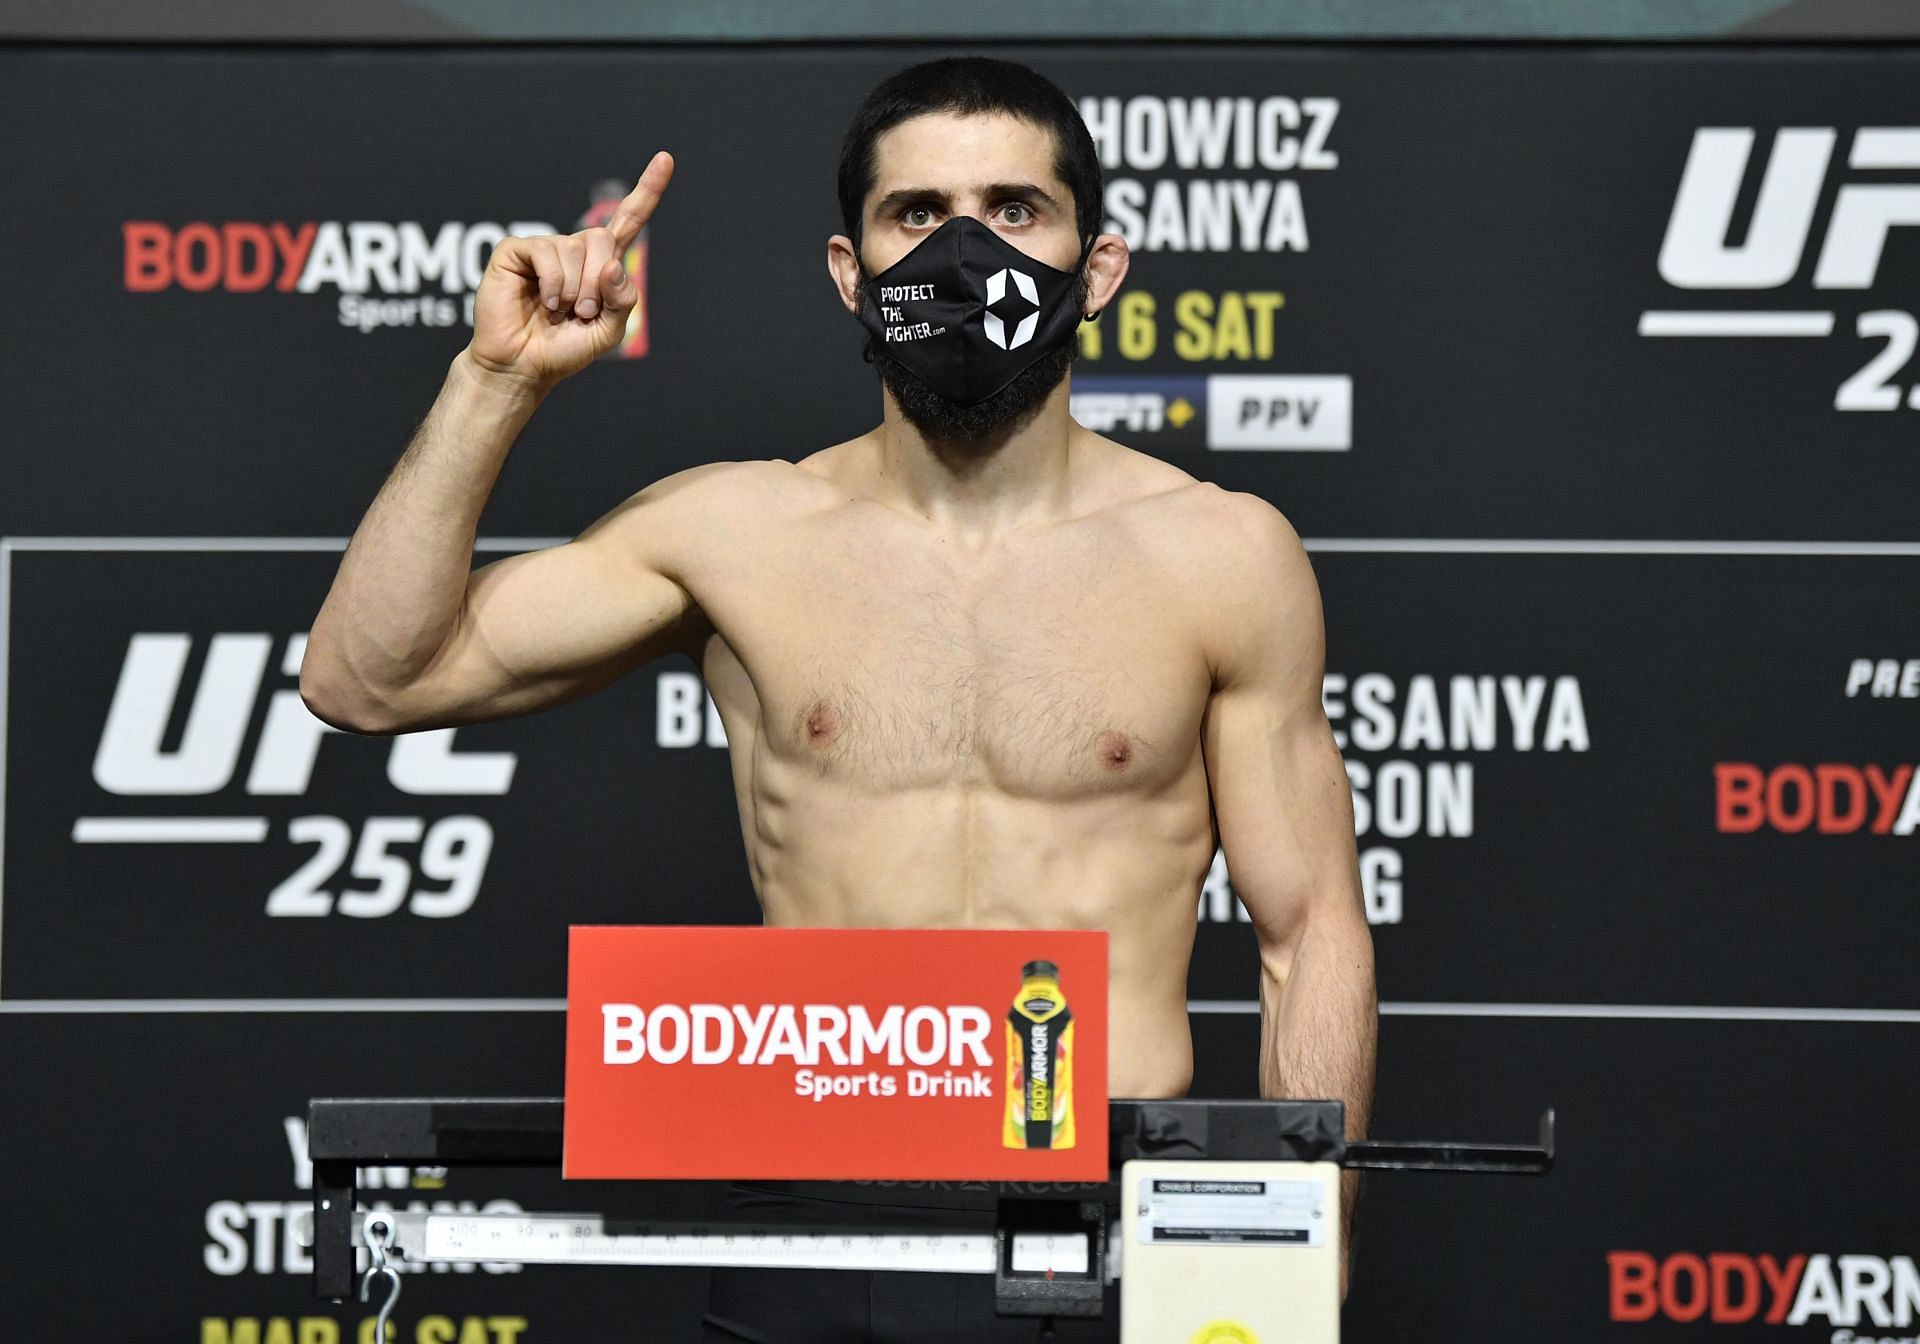 Islam Makhachev has only ever lost one fight in the UFC, and that came back in 2015